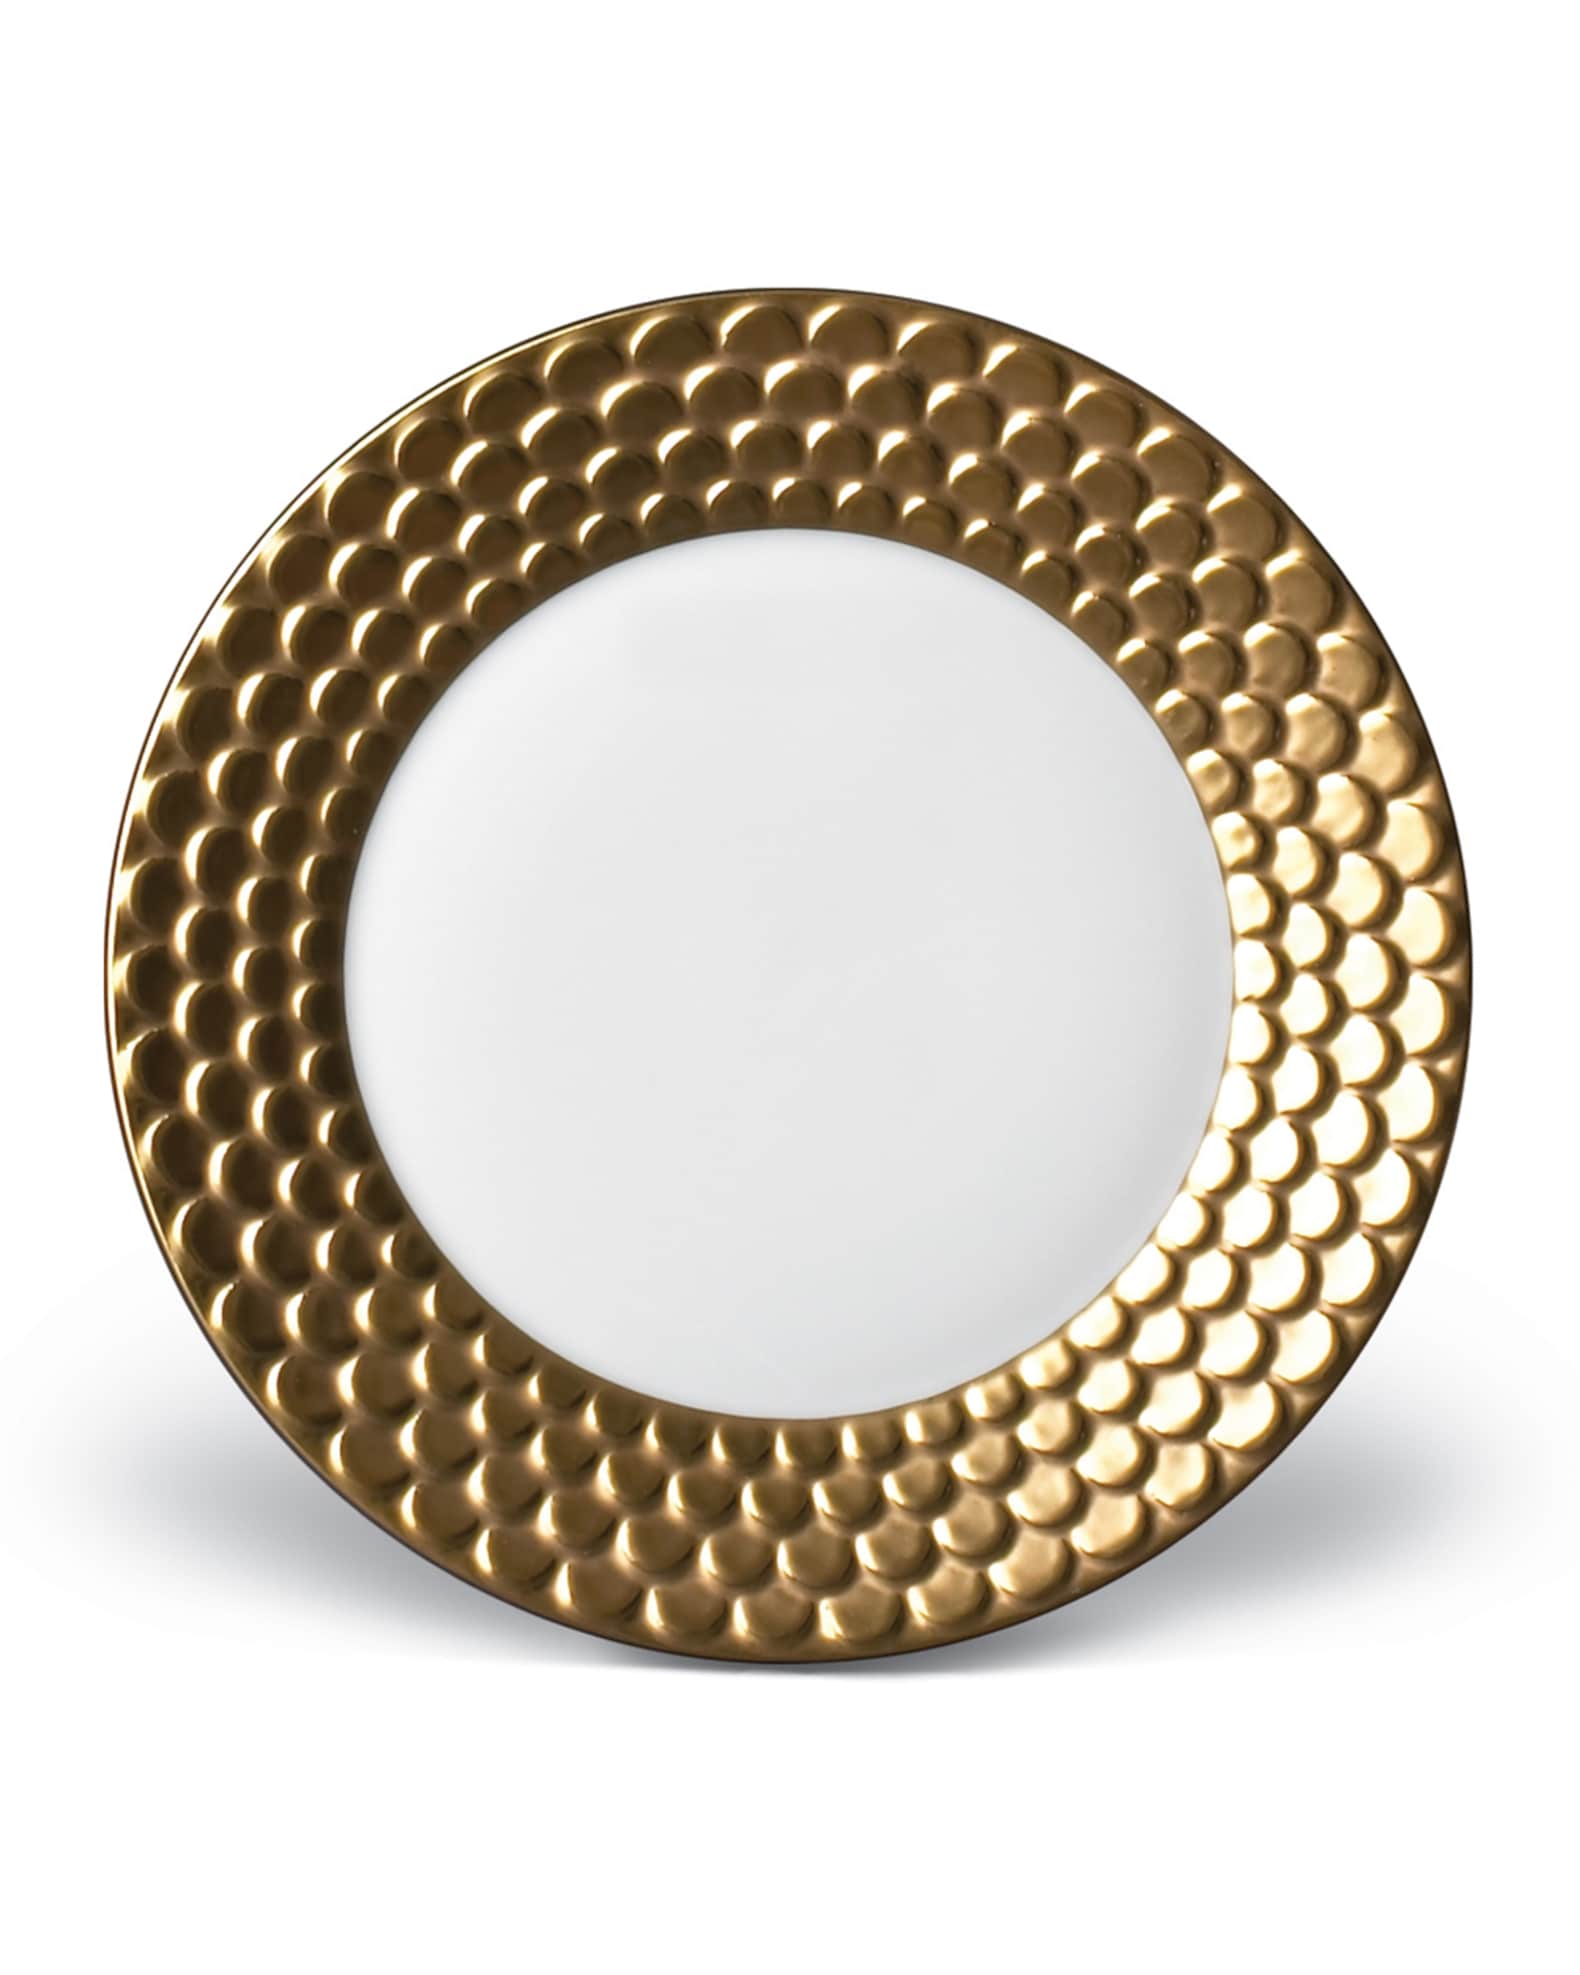 L'Objet Aegean Gold Bread and Butter Plate | Neiman Marcus